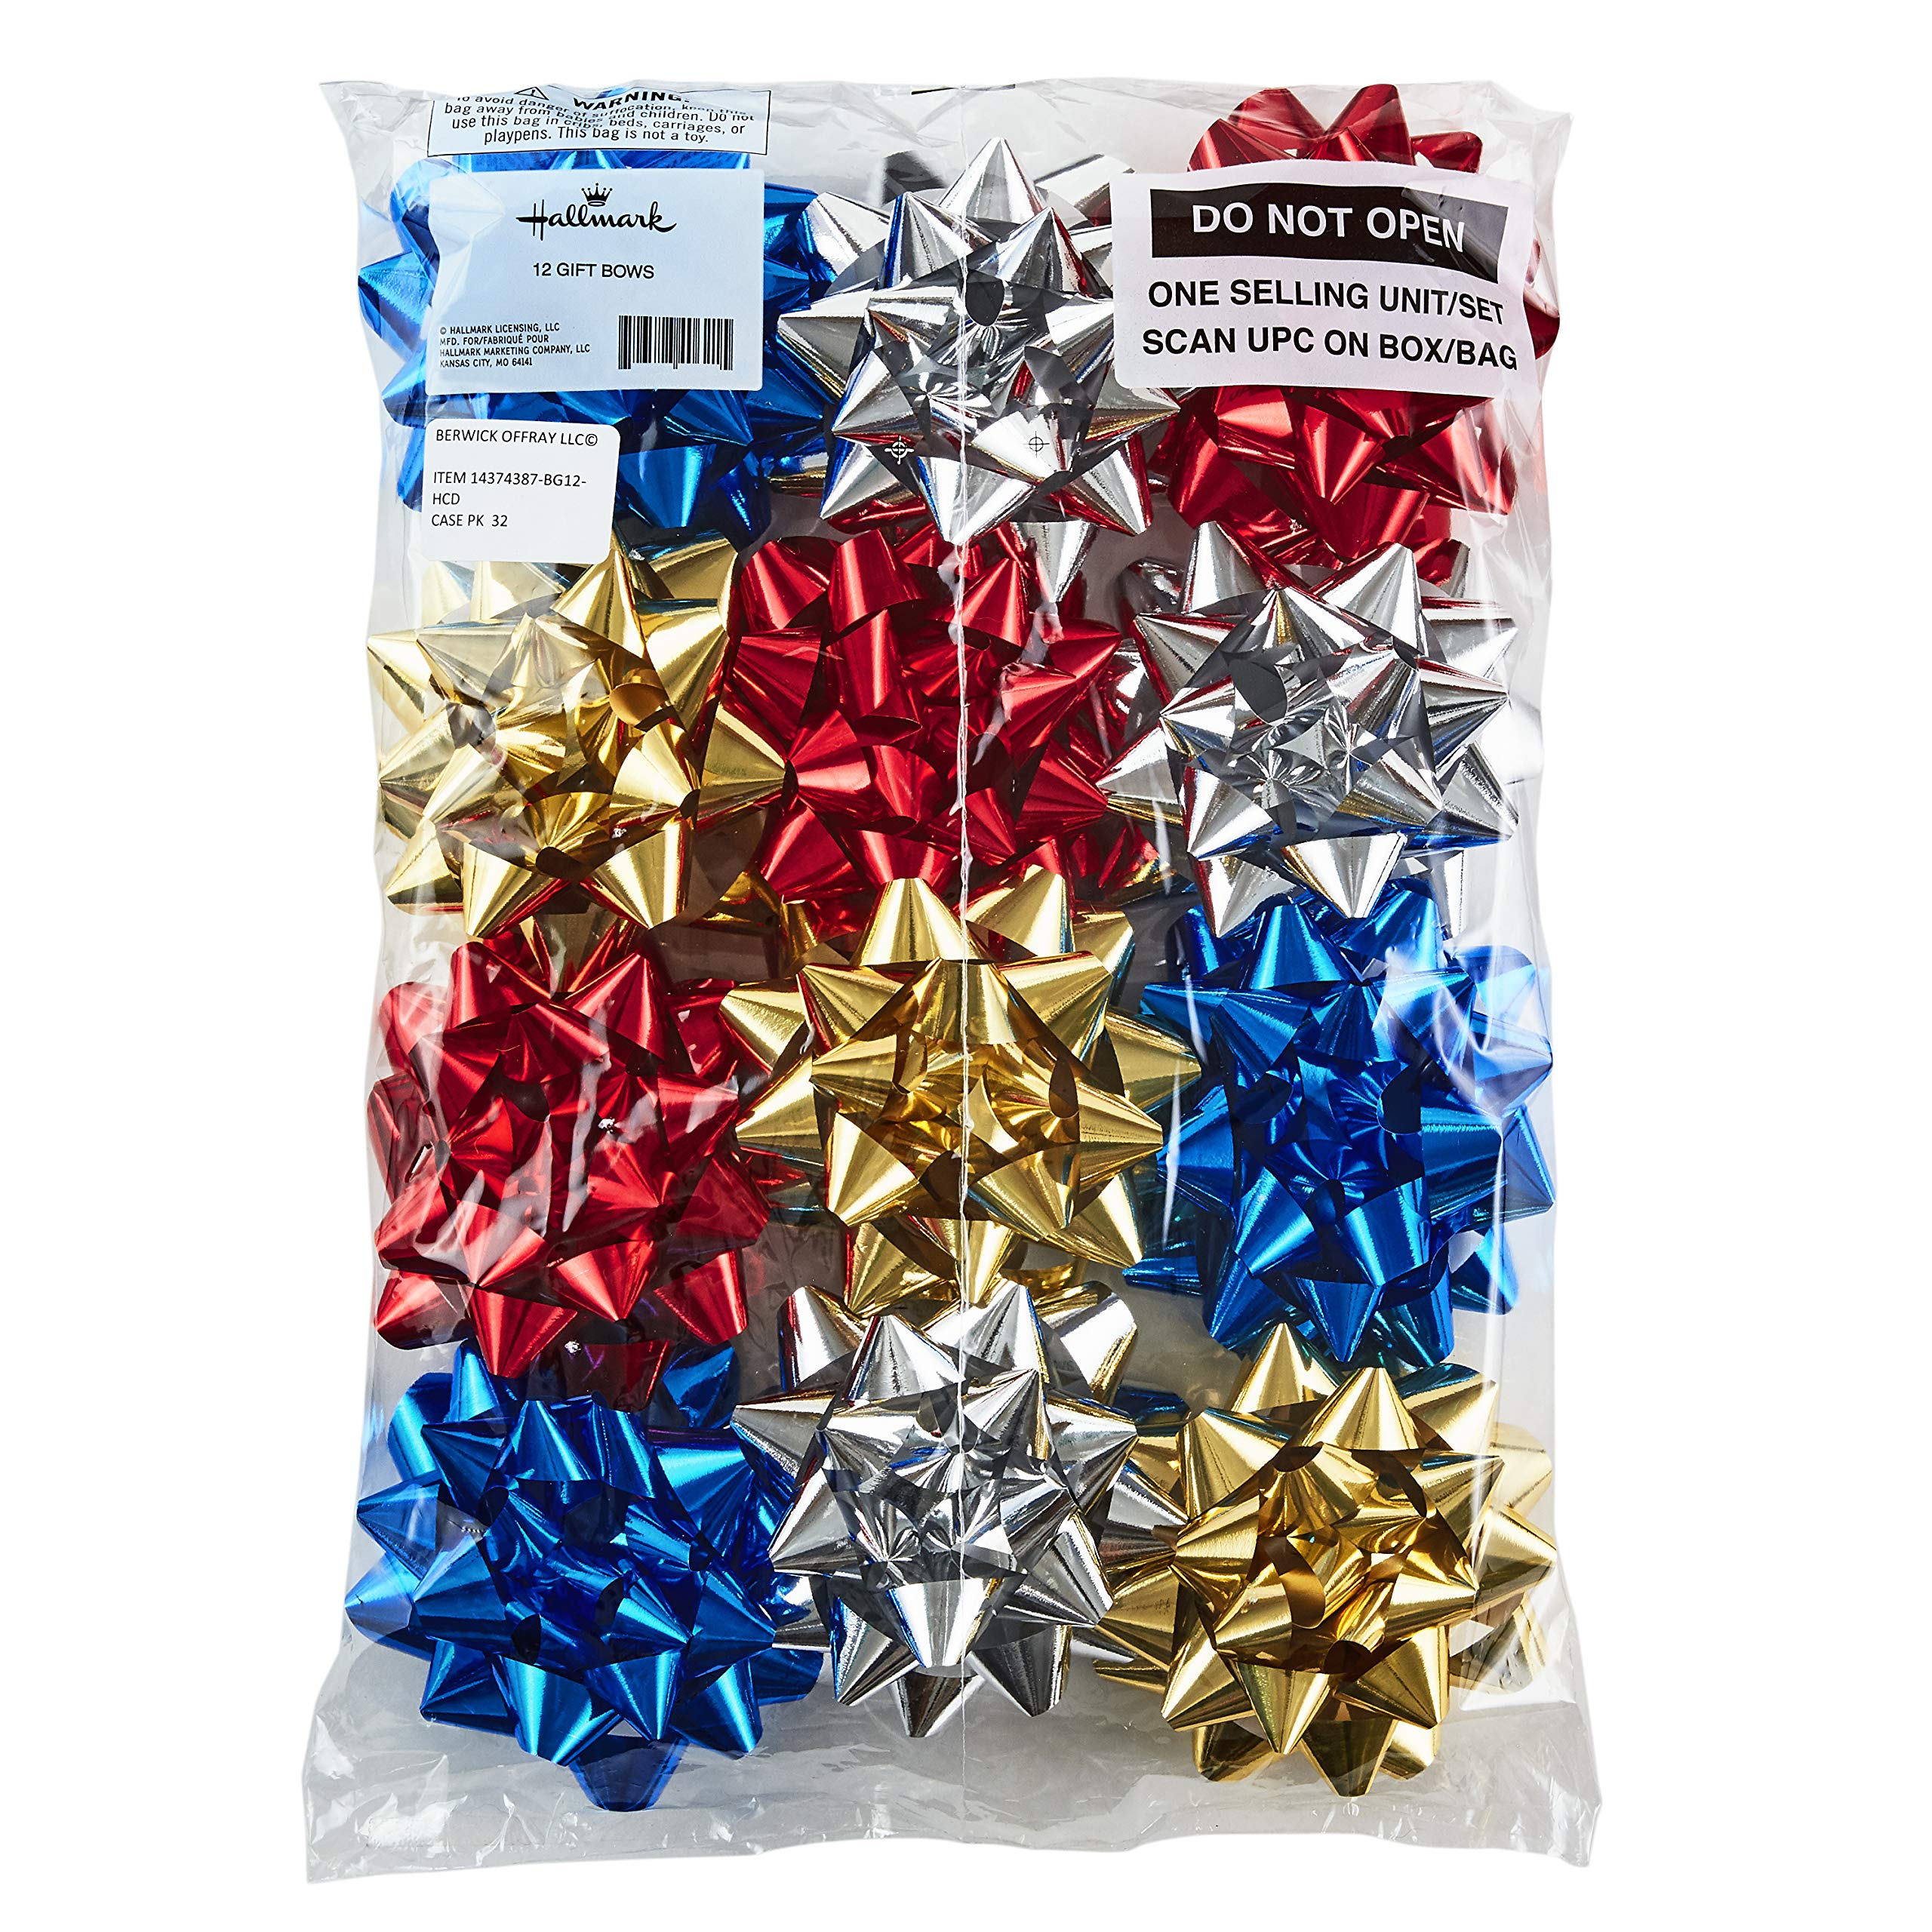 Hallmark Holiday Gift Bow Assortment (12 Bows) Sparkly Red, Blue, Gold, White for Christmas, Hanukkah, Birthdays, Weddings, Bridal Showers